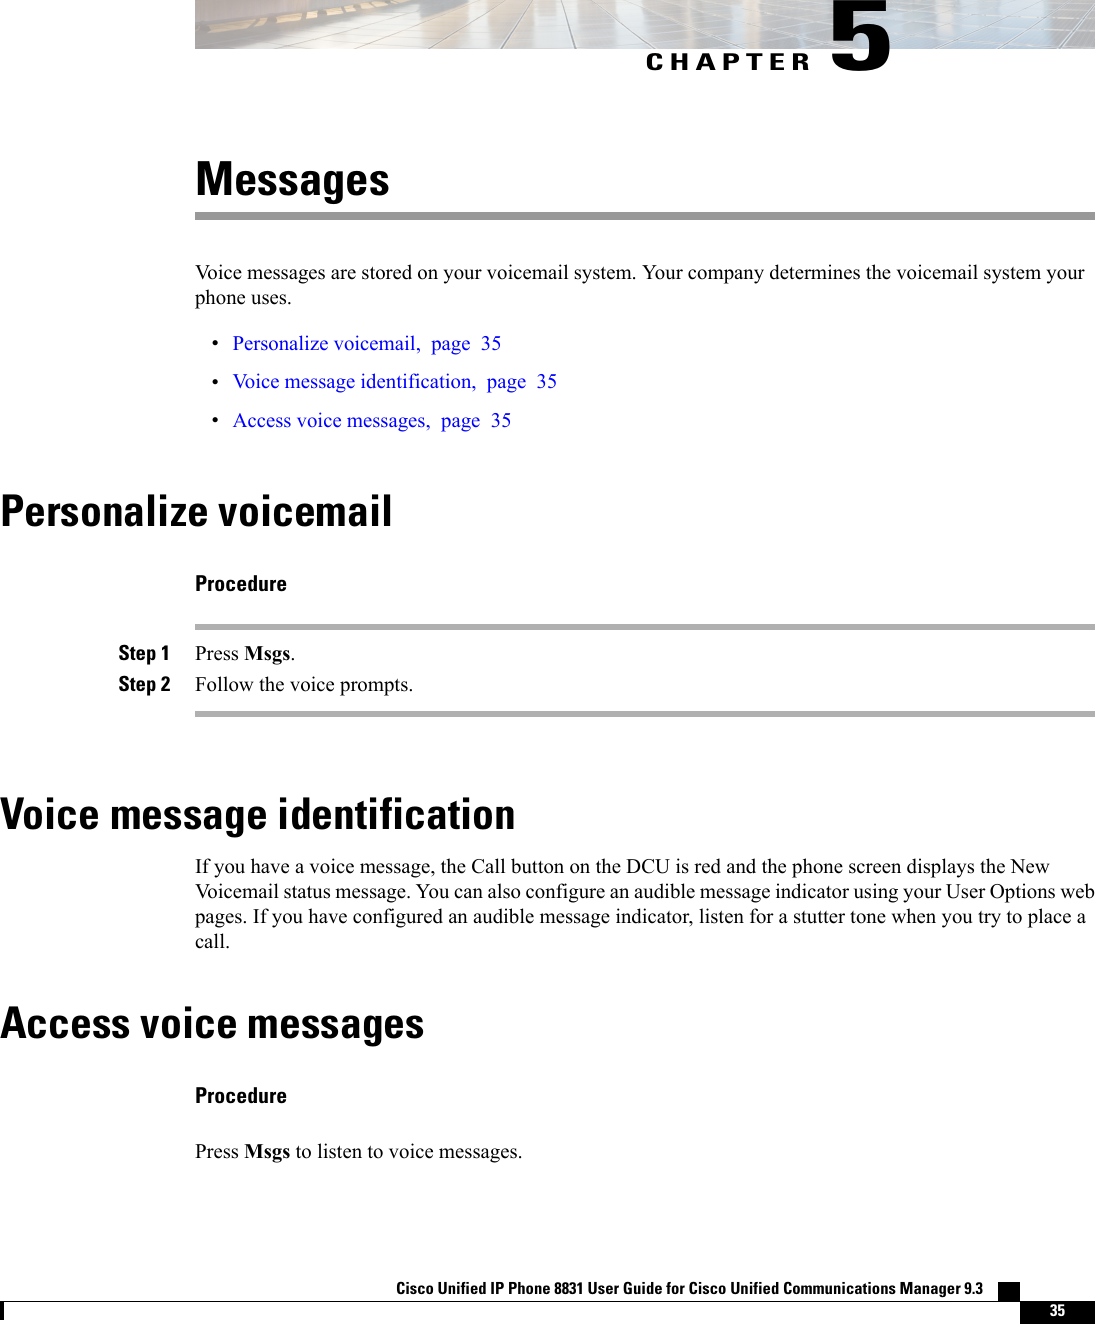 CHAPTER 5MessagesVoice messages are stored on your voicemail system. Your company determines the voicemail system yourphone uses.•Personalize voicemail, page 35•Voice message identification, page 35•Access voice messages, page 35Personalize voicemailProcedureStep 1 Press Msgs.Step 2 Follow the voice prompts.Voice message identificationIf you have a voice message, the Call button on the DCU is red and the phone screen displays the NewVoicemail status message. You can also configure an audible message indicator using your User Options webpages. If you have configured an audible message indicator, listen for a stutter tone when you try to place acall.Access voice messagesProcedurePress Msgs to listen to voice messages.Cisco Unified IP Phone 8831 User Guide for Cisco Unified Communications Manager 9.3    35